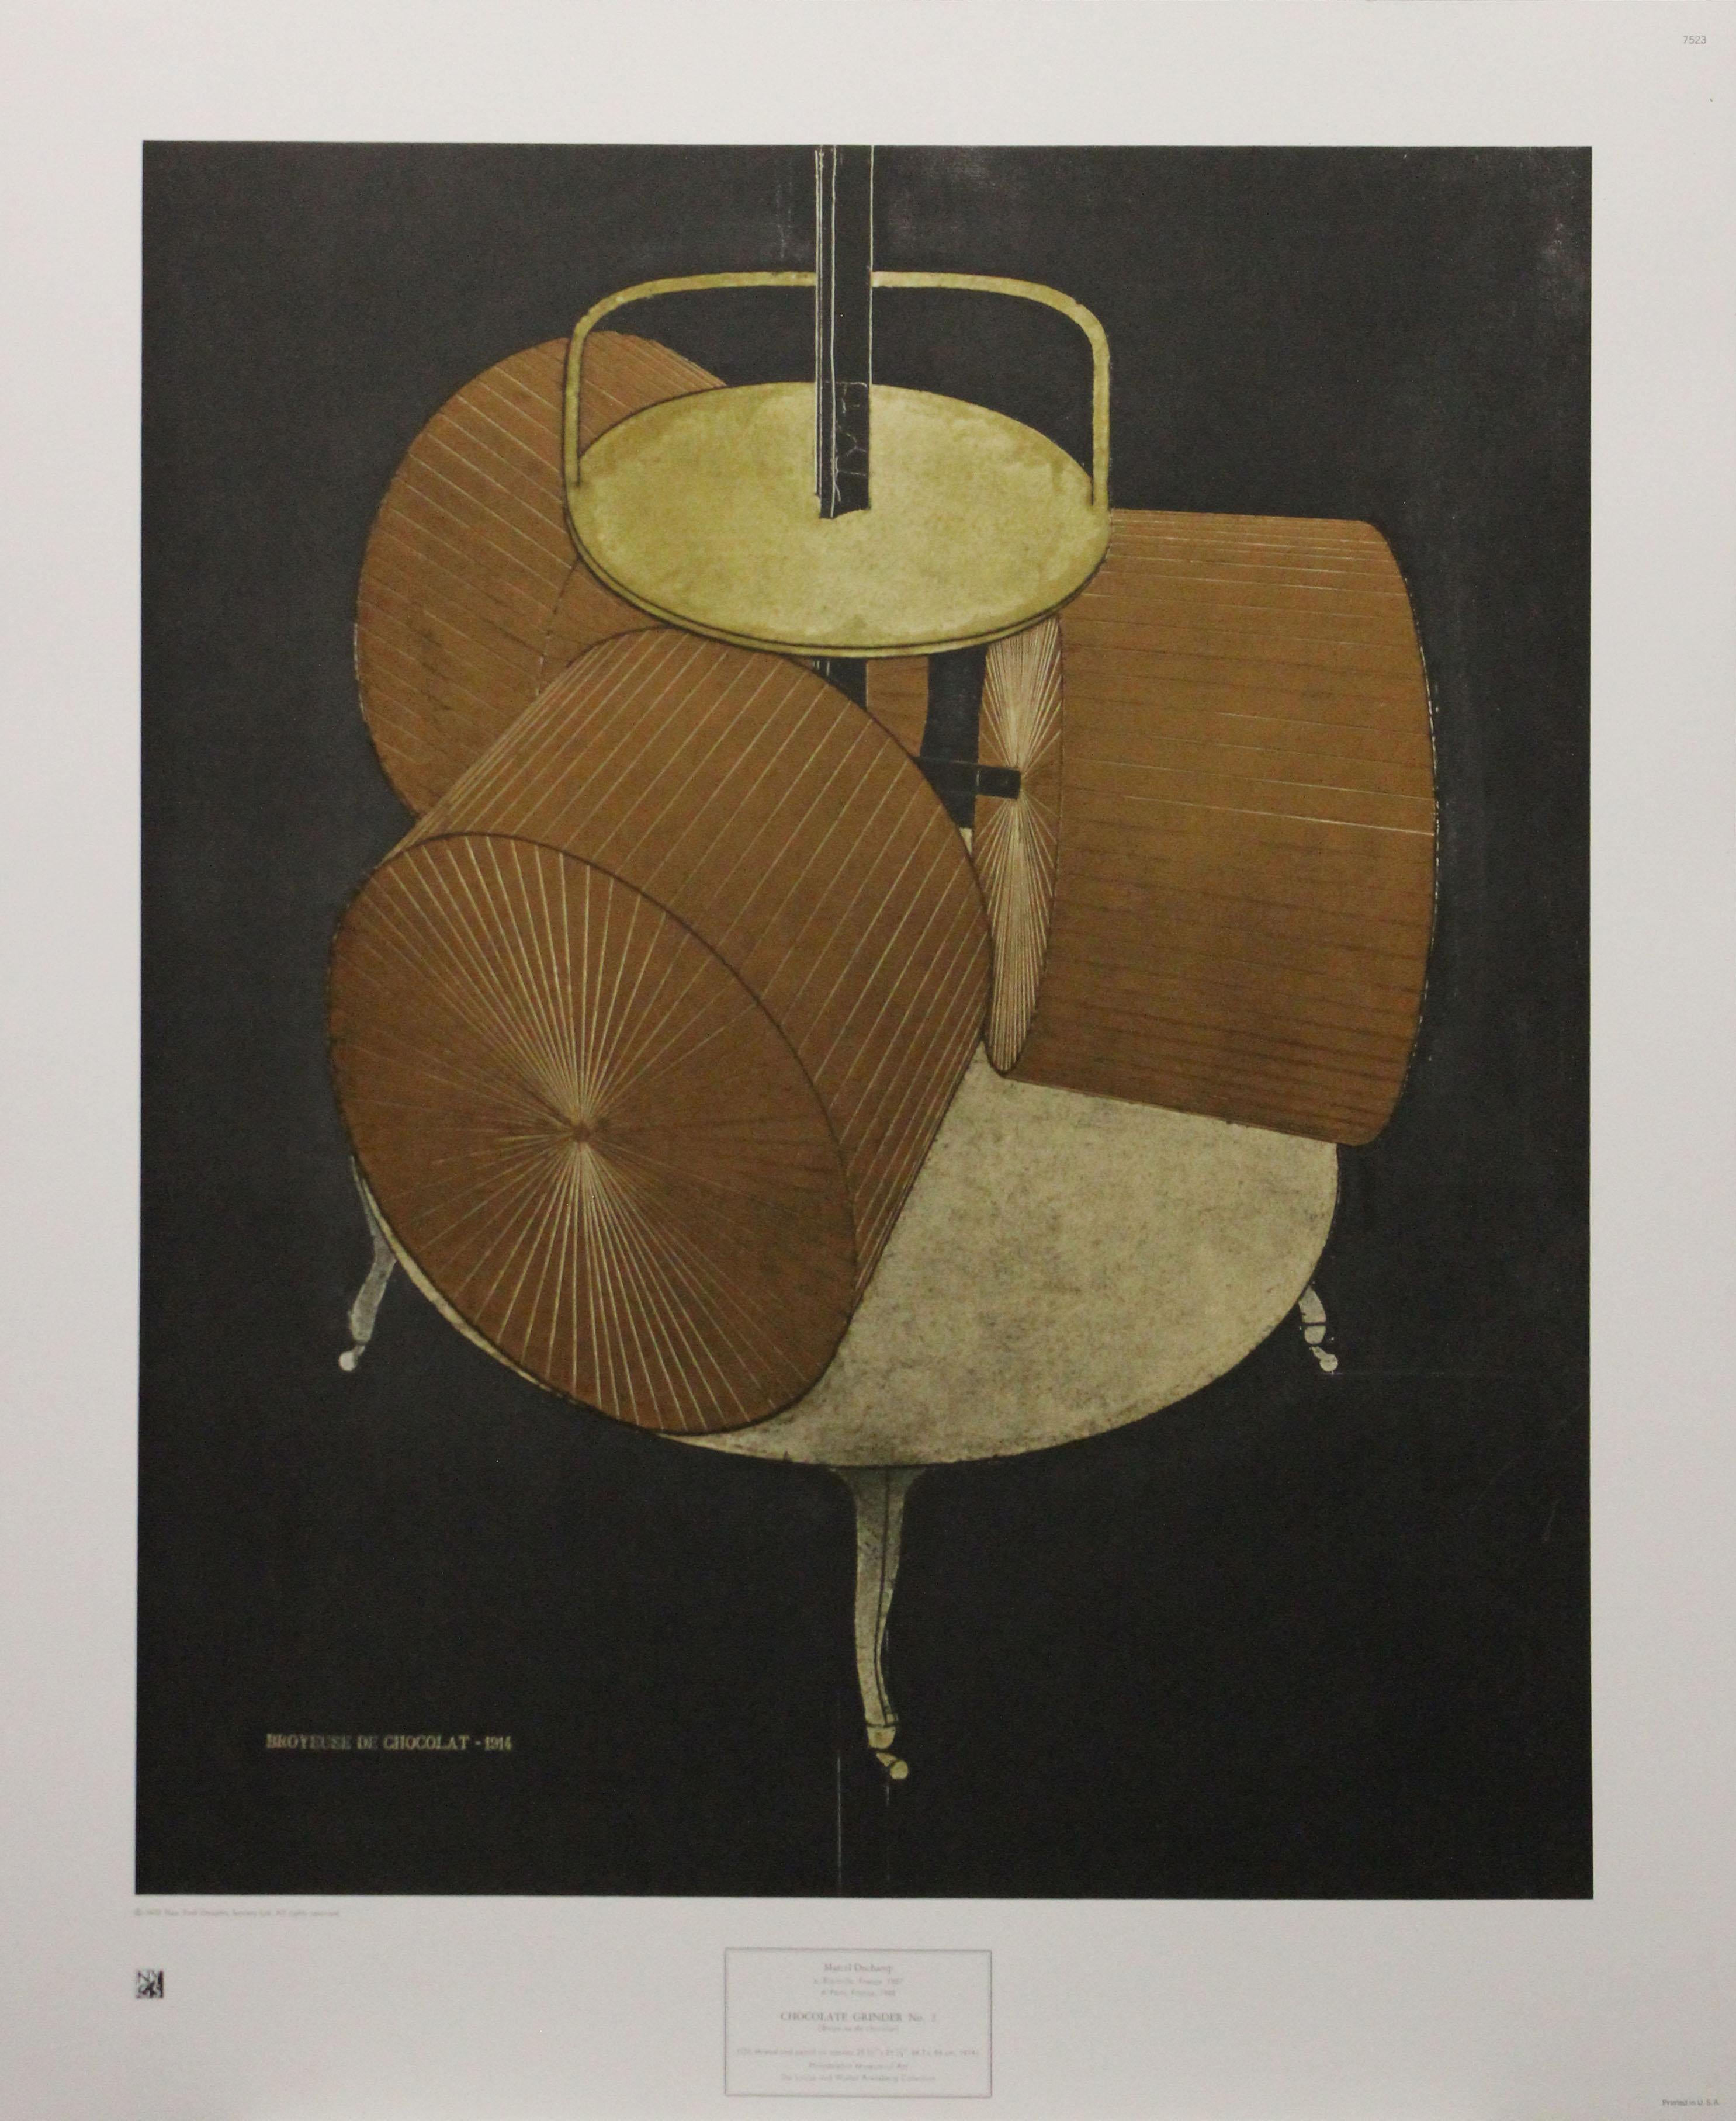 (after) Marcel Duchamp Still-Life Print - Chocolate Grinder No. 2-Poster, 1972 New York Graphic Society